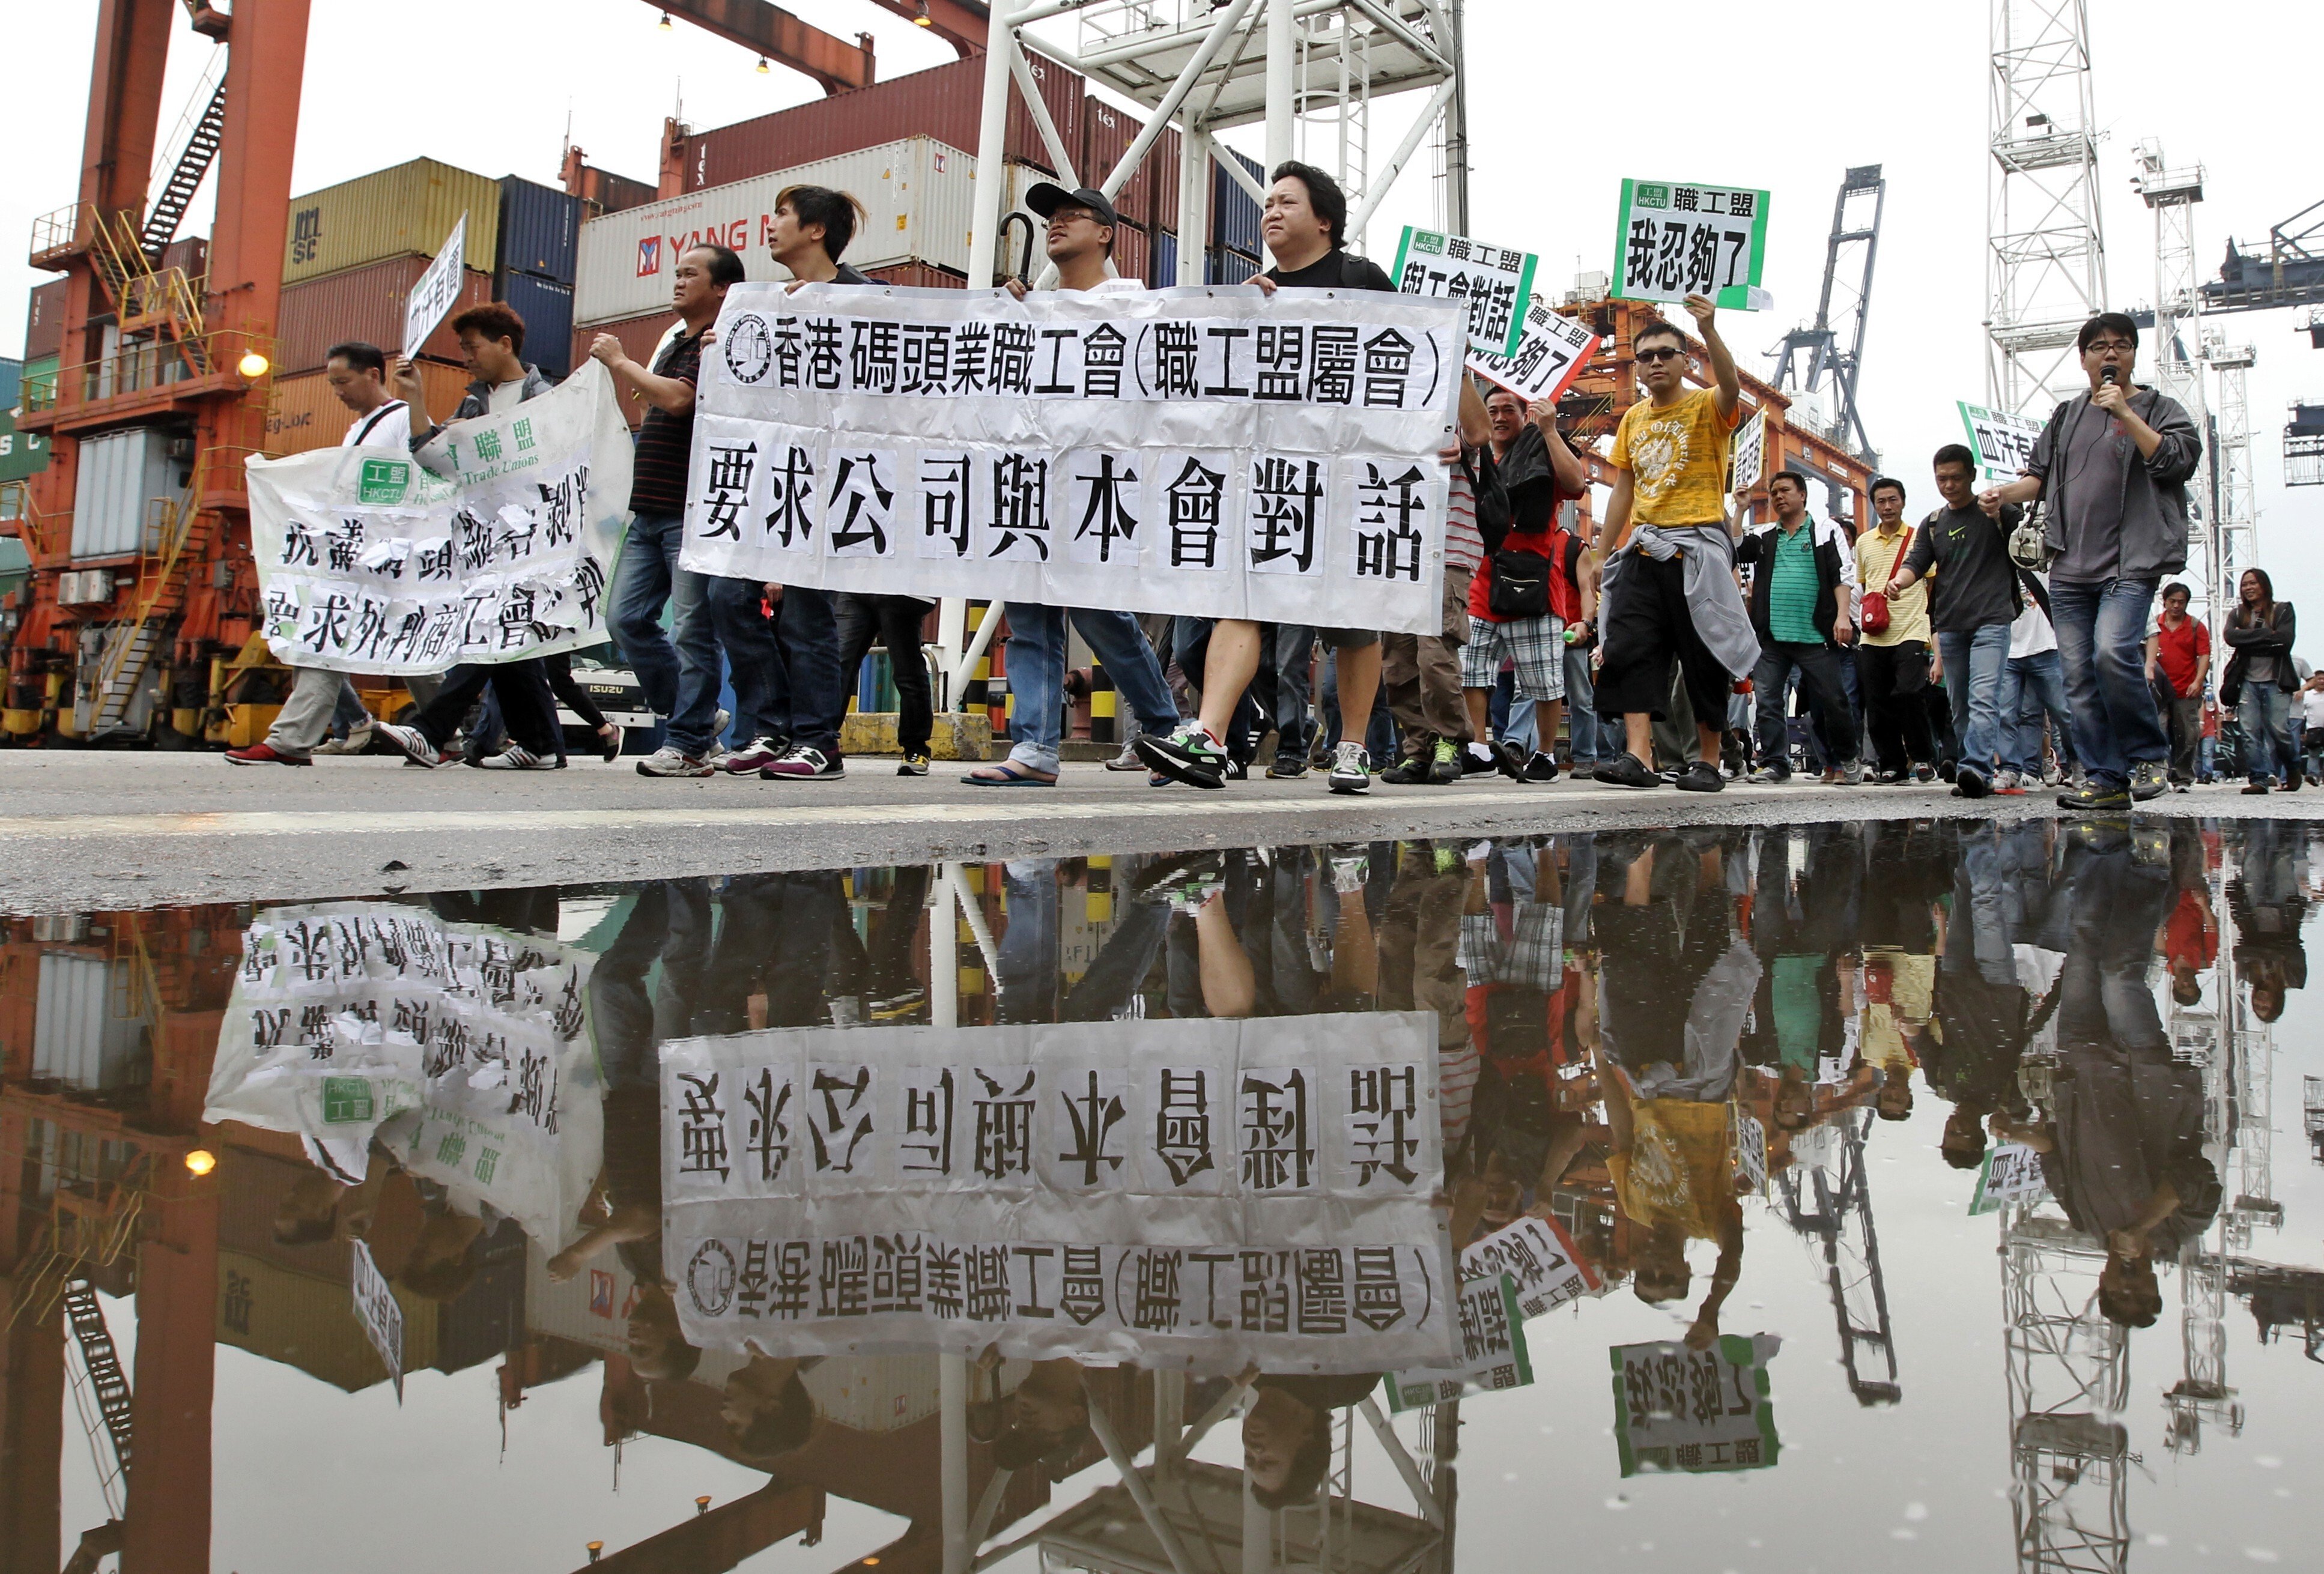 The CTU was instrumental in the dock workers’ strike at the Kwai Tsing Container Terminals in 2013. Photo: Edward Wong